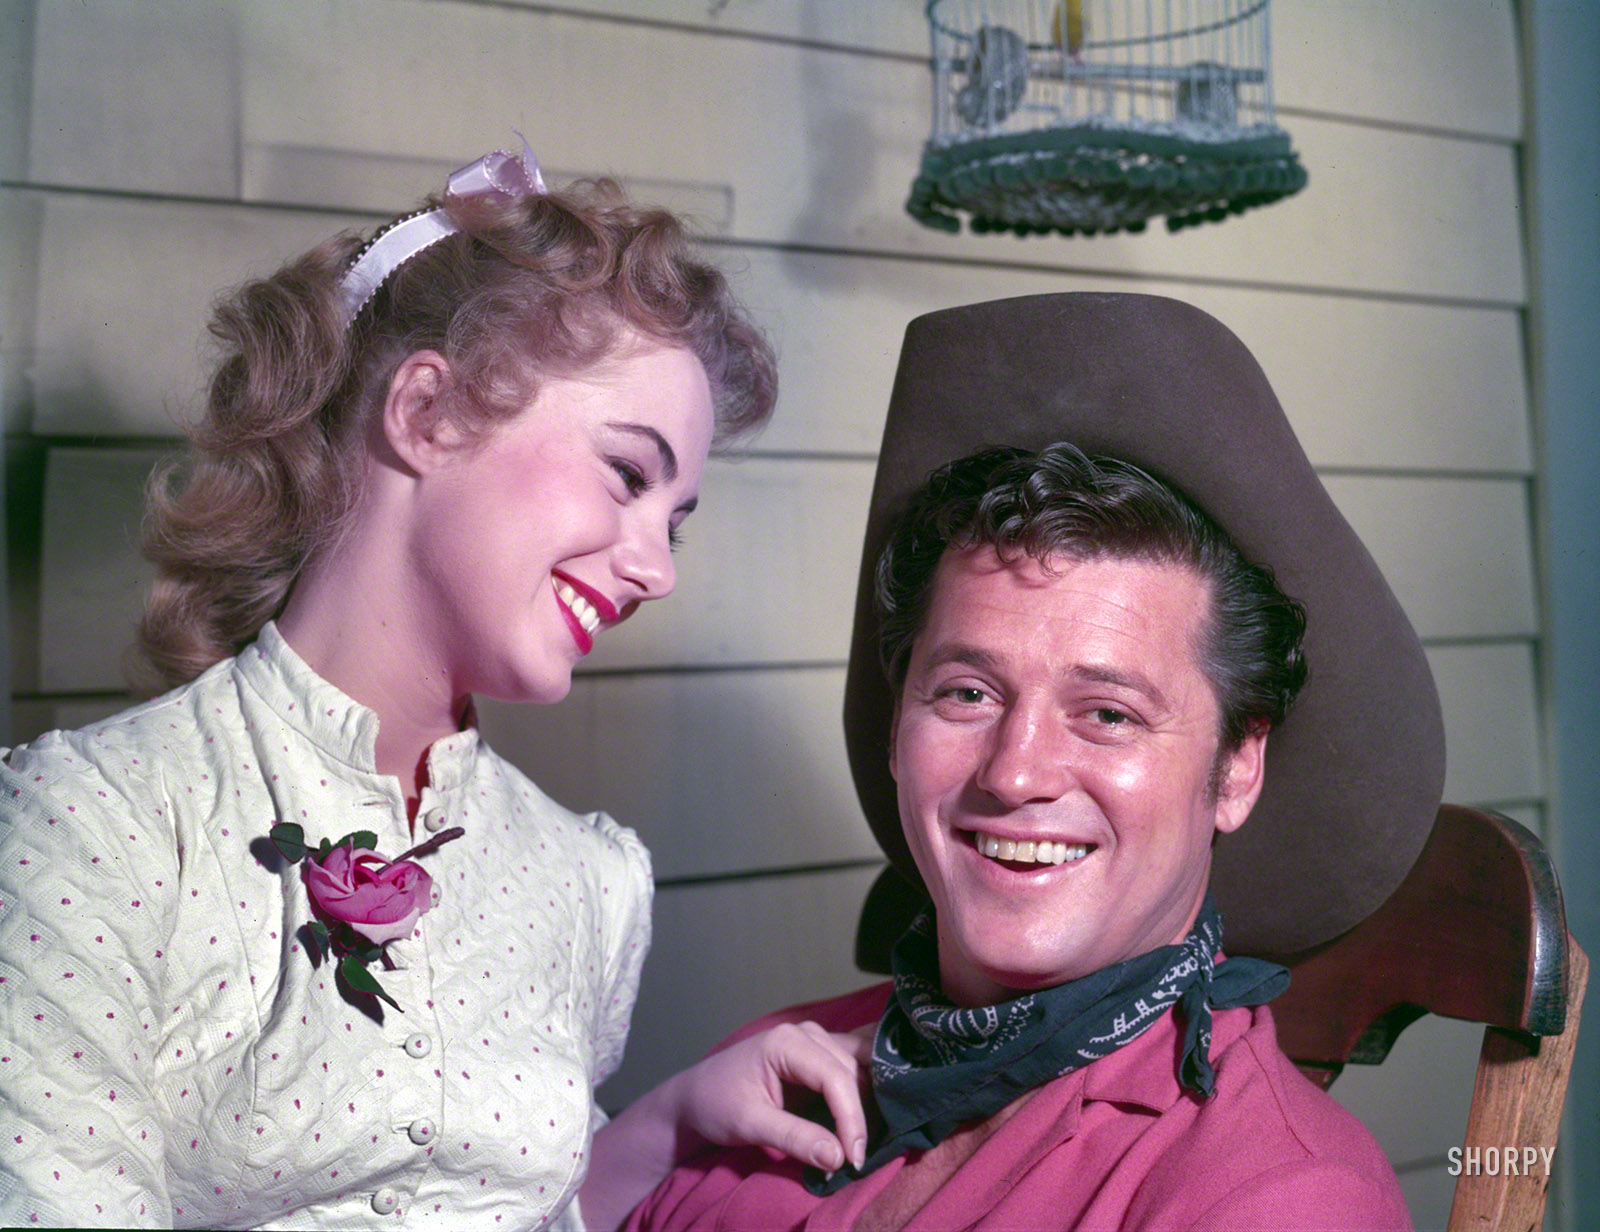 Shirley Jones and Gordon MacRae in 1954 filming a scene for the Technicolor version of the musical "Oklahoma!" Photo by Maurice Terrell for the Look magazine article "Shirley Jones: The Girl From Oklahoma!" View full size.